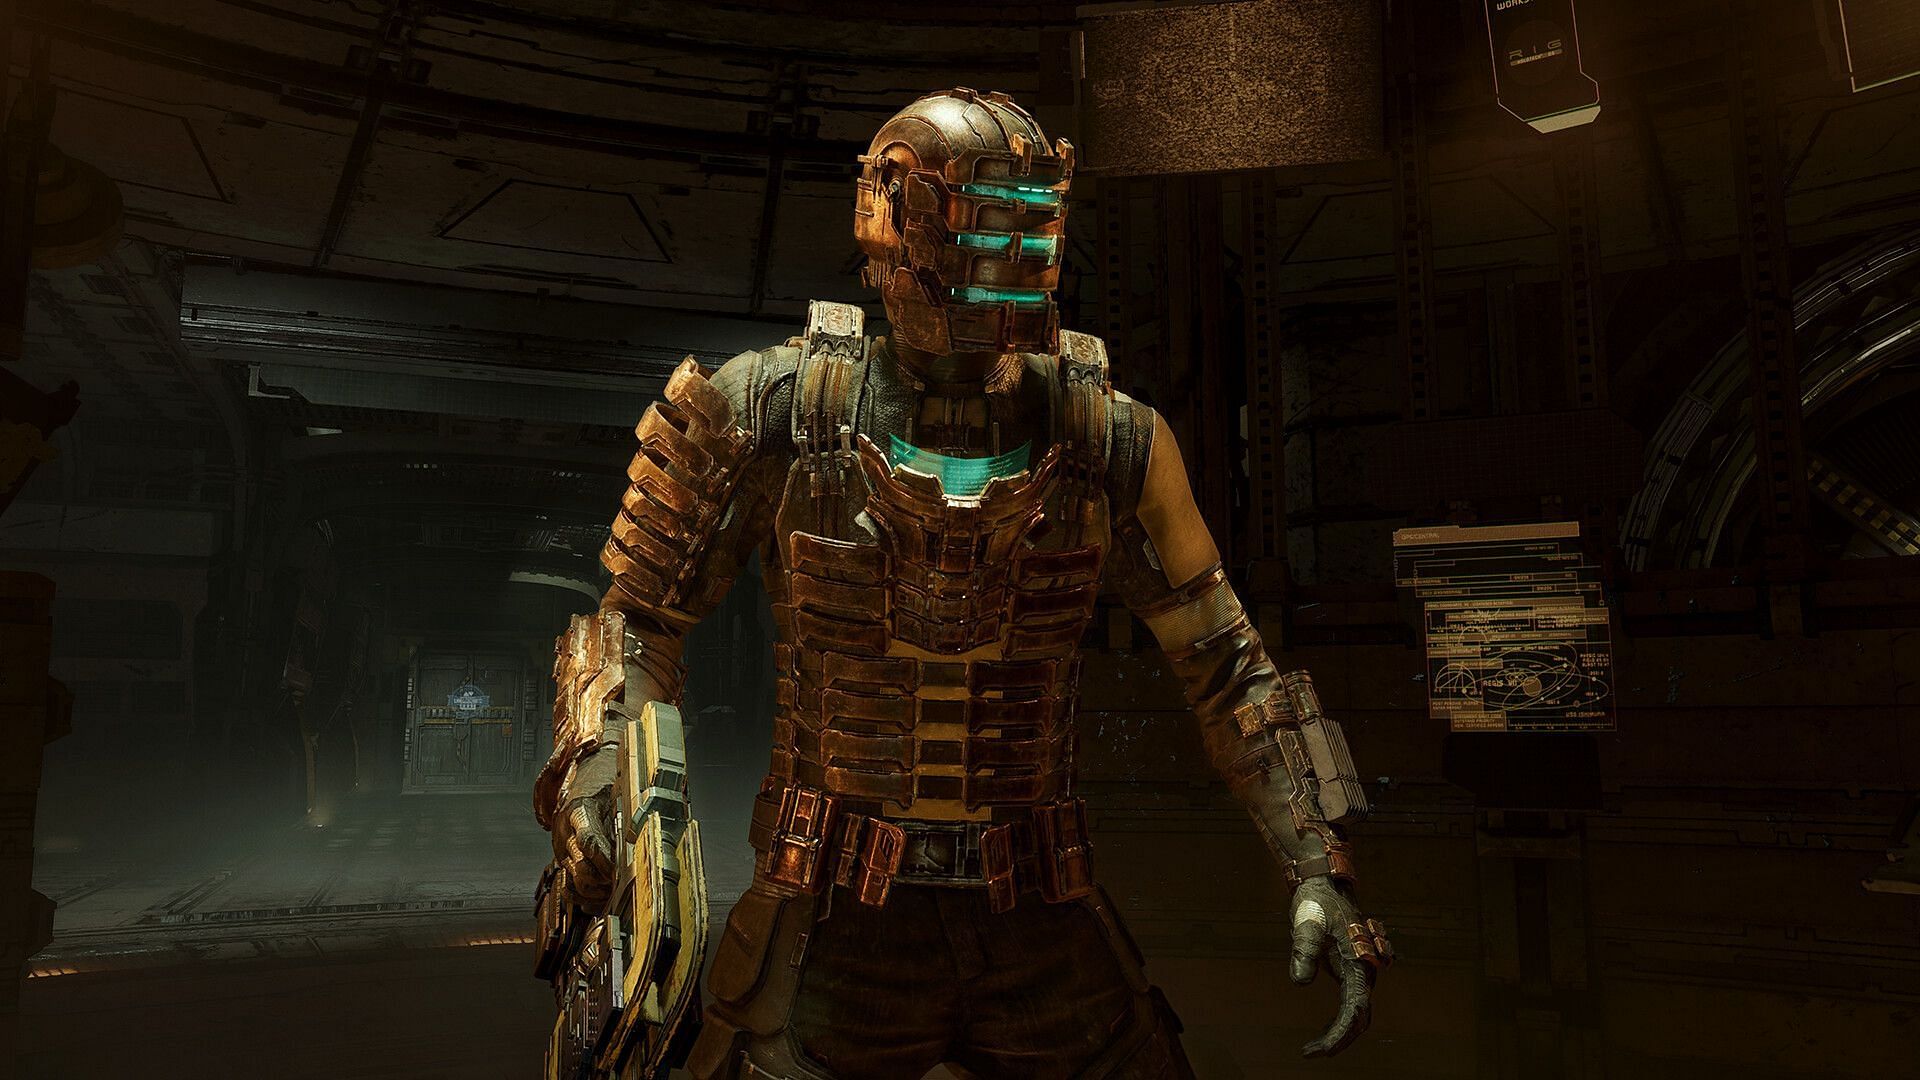 Dead Space Rig Level 4 [Team Fortress 2] [Mods]